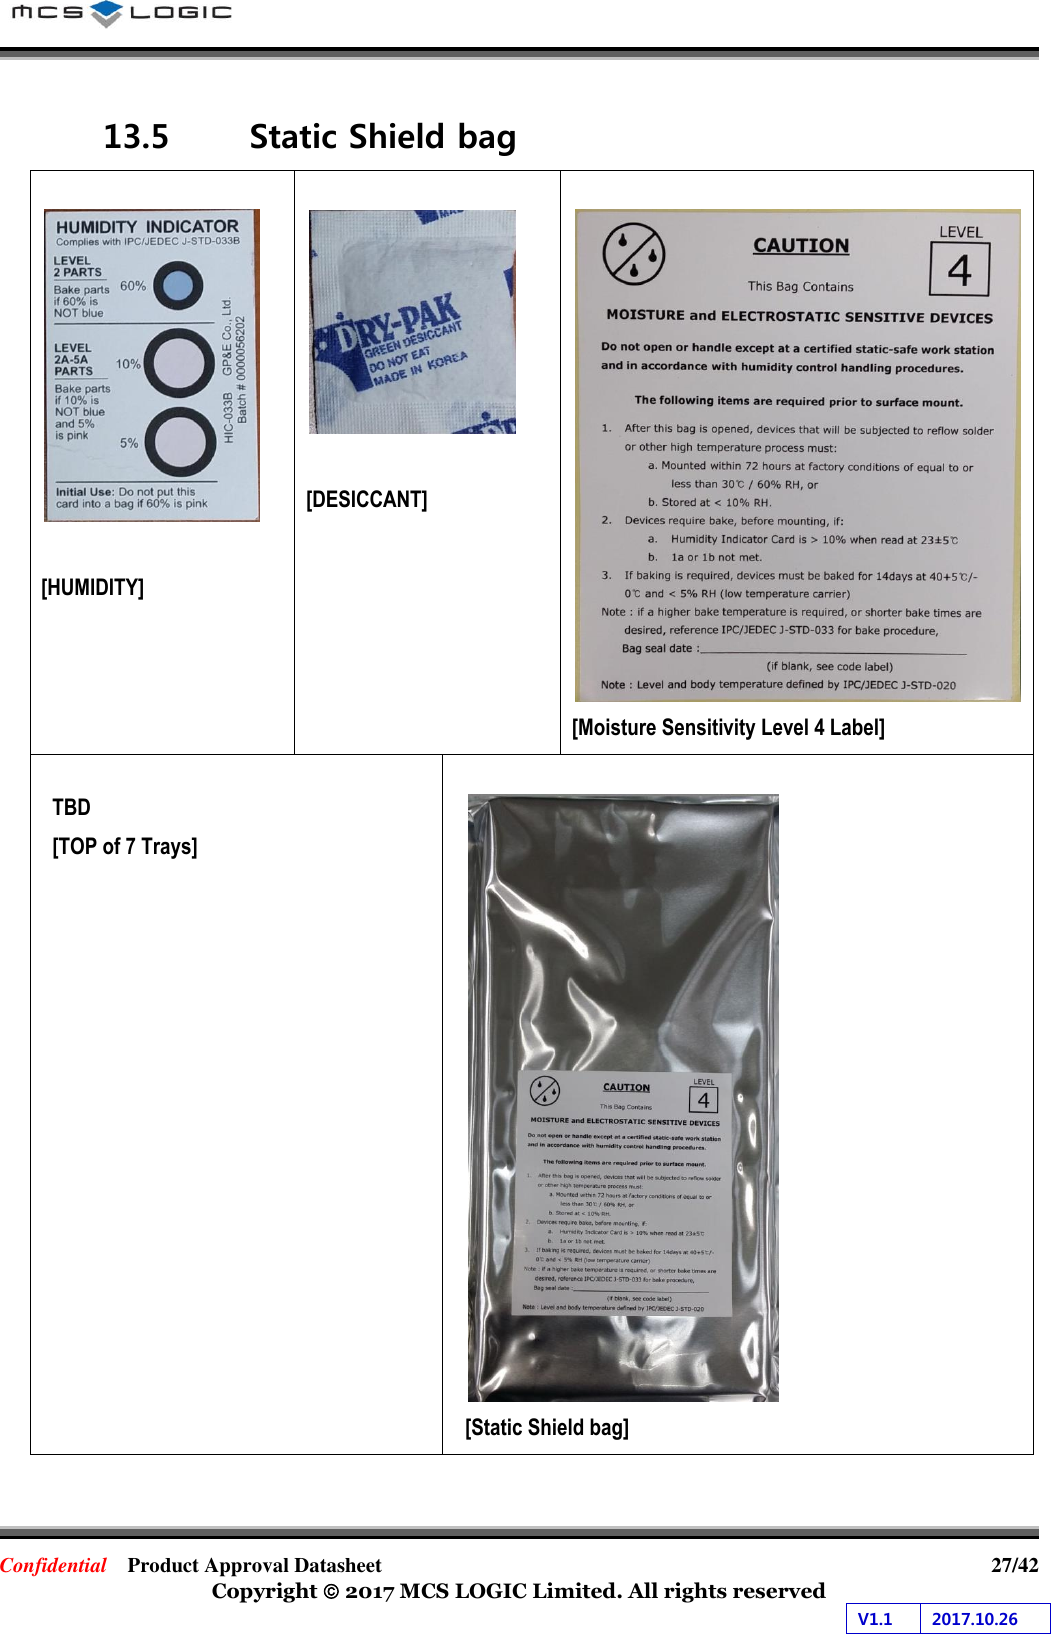 Confidential  Product Approval Datasheet  27/42 Copyright  2017 MCS LOGIC Limited. All rights reserved V1.1 2017.10.26 13.5 Static Shield bag [HUMIDITY] [DESICCANT] [Moisture Sensitivity Level 4 Label] TBD [TOP of 7 Trays] [Static Shield bag] 